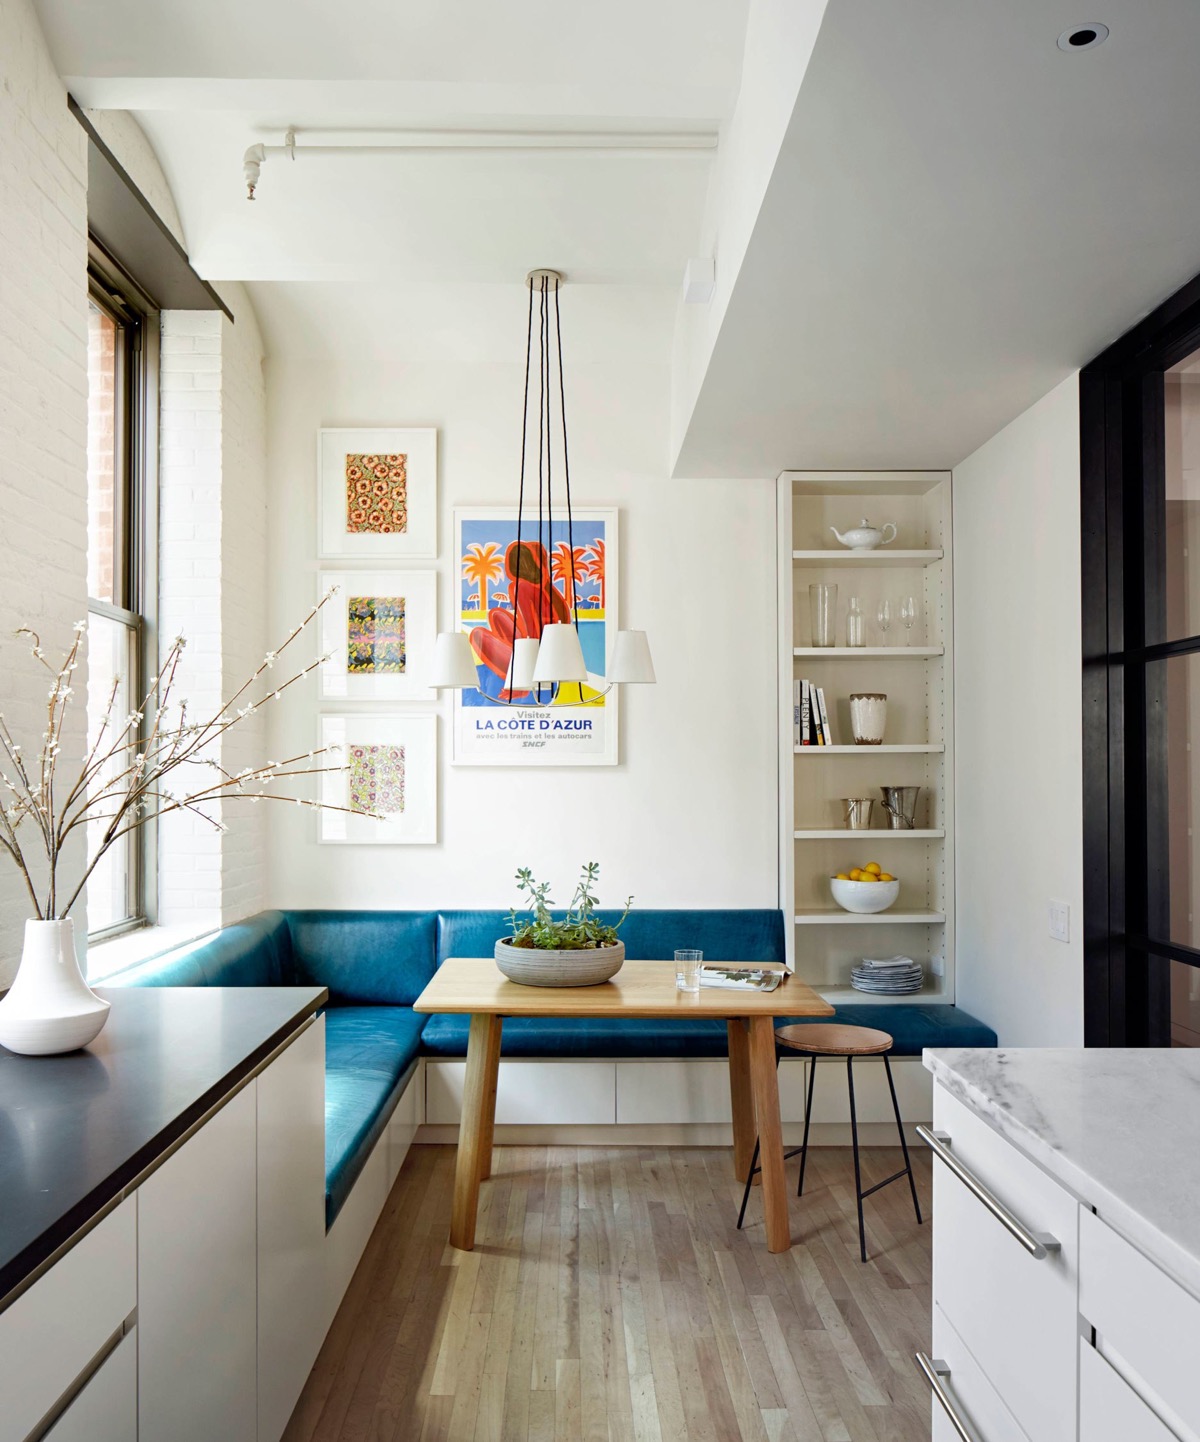 18 Beautiful Breakfast Nooks That Add To Your Kitchen's Charm